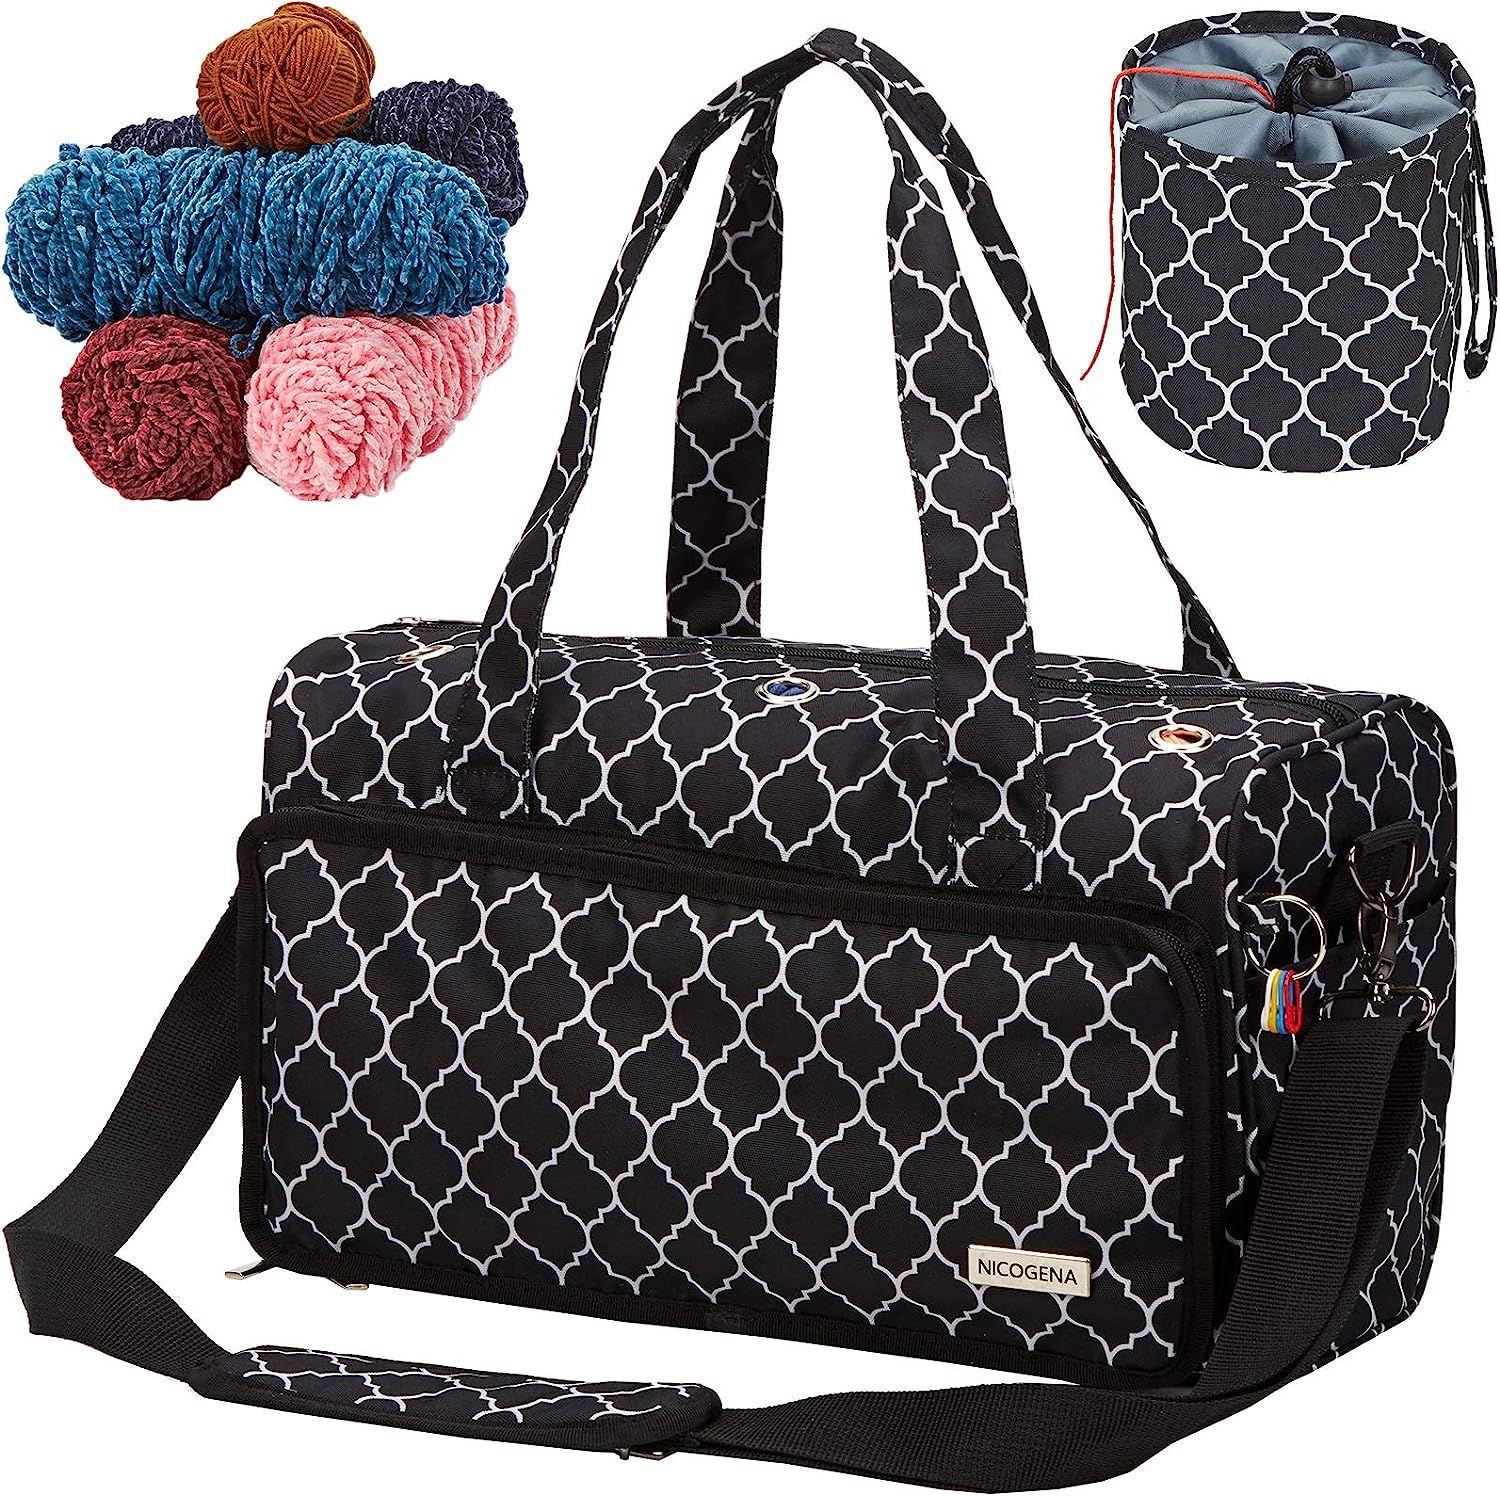 NICOGENA Knitting Bag, Large Capacity Portable Yarn Storage Tote for Yarn Skeins and Accessories ... | Amazon (US)